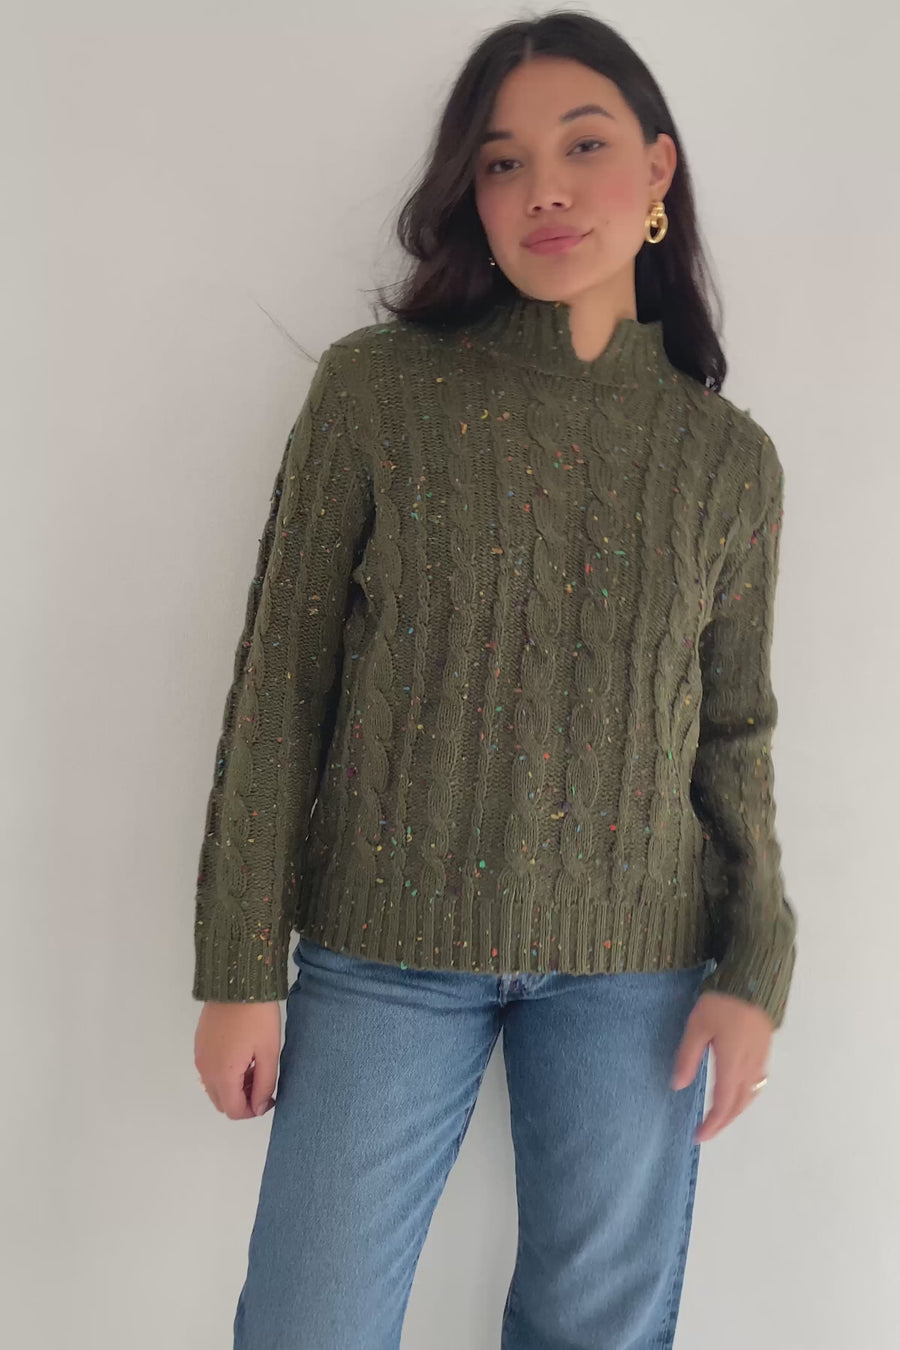 Aster Pullover - Green